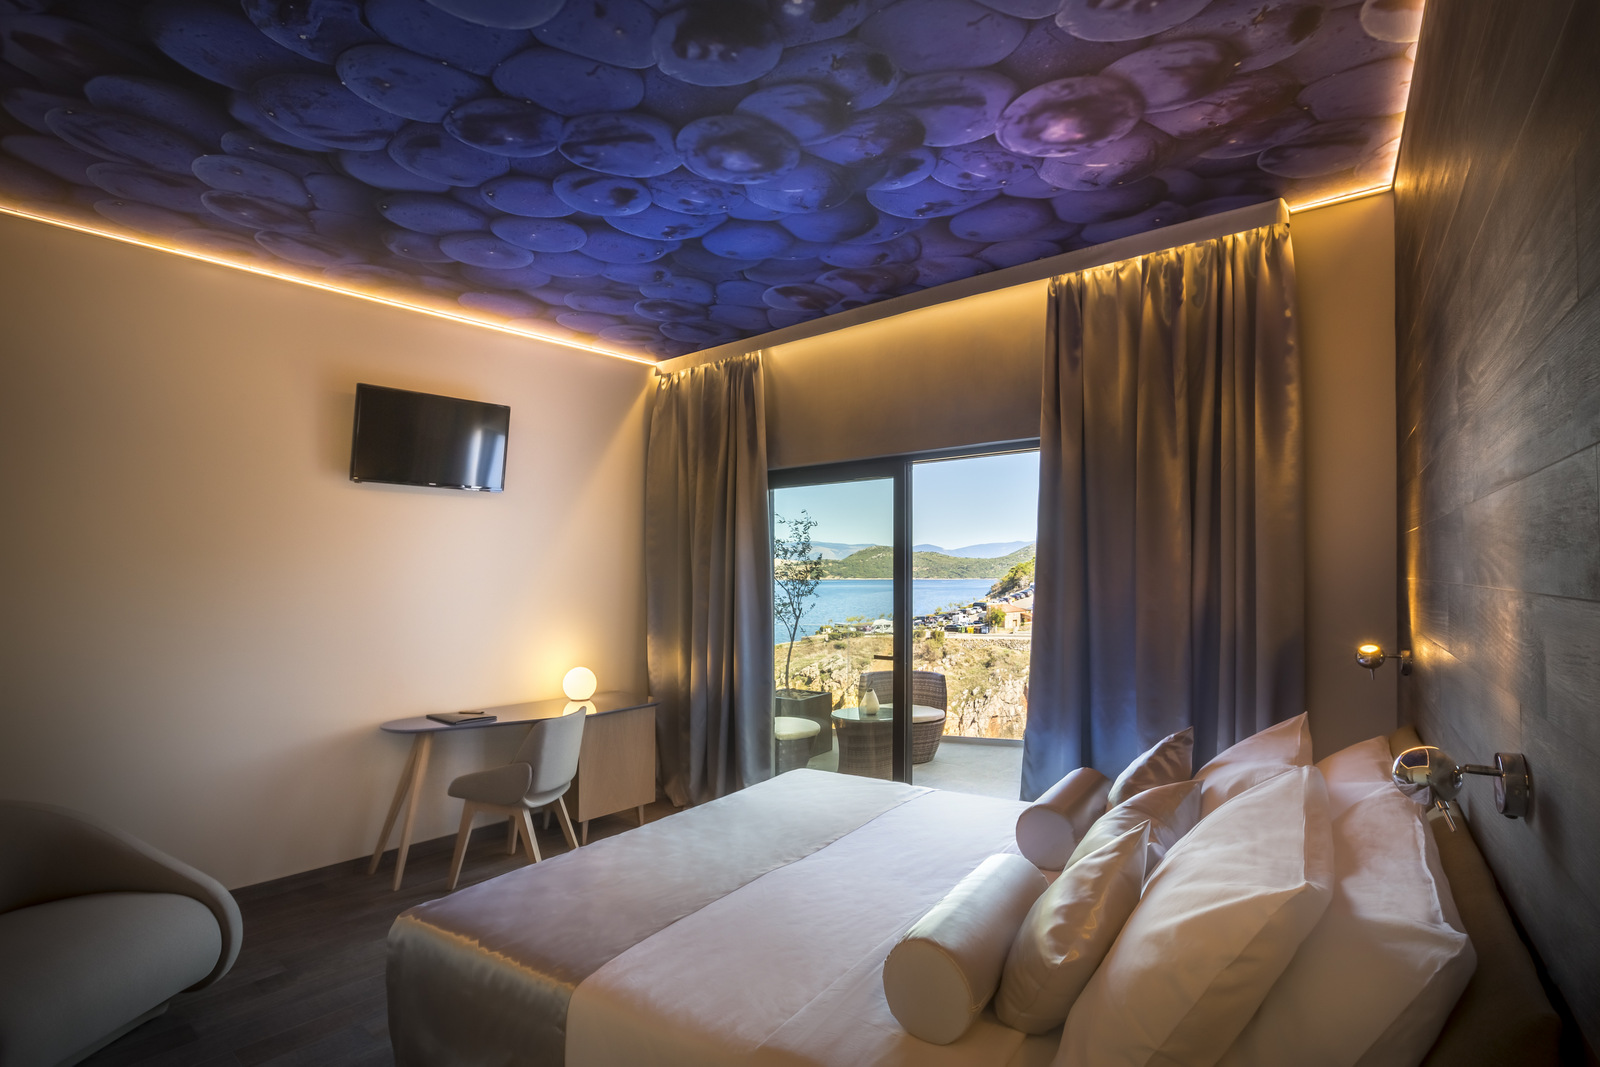 [PHOTOS] First Wine Hotel Opens on the Island of Krk